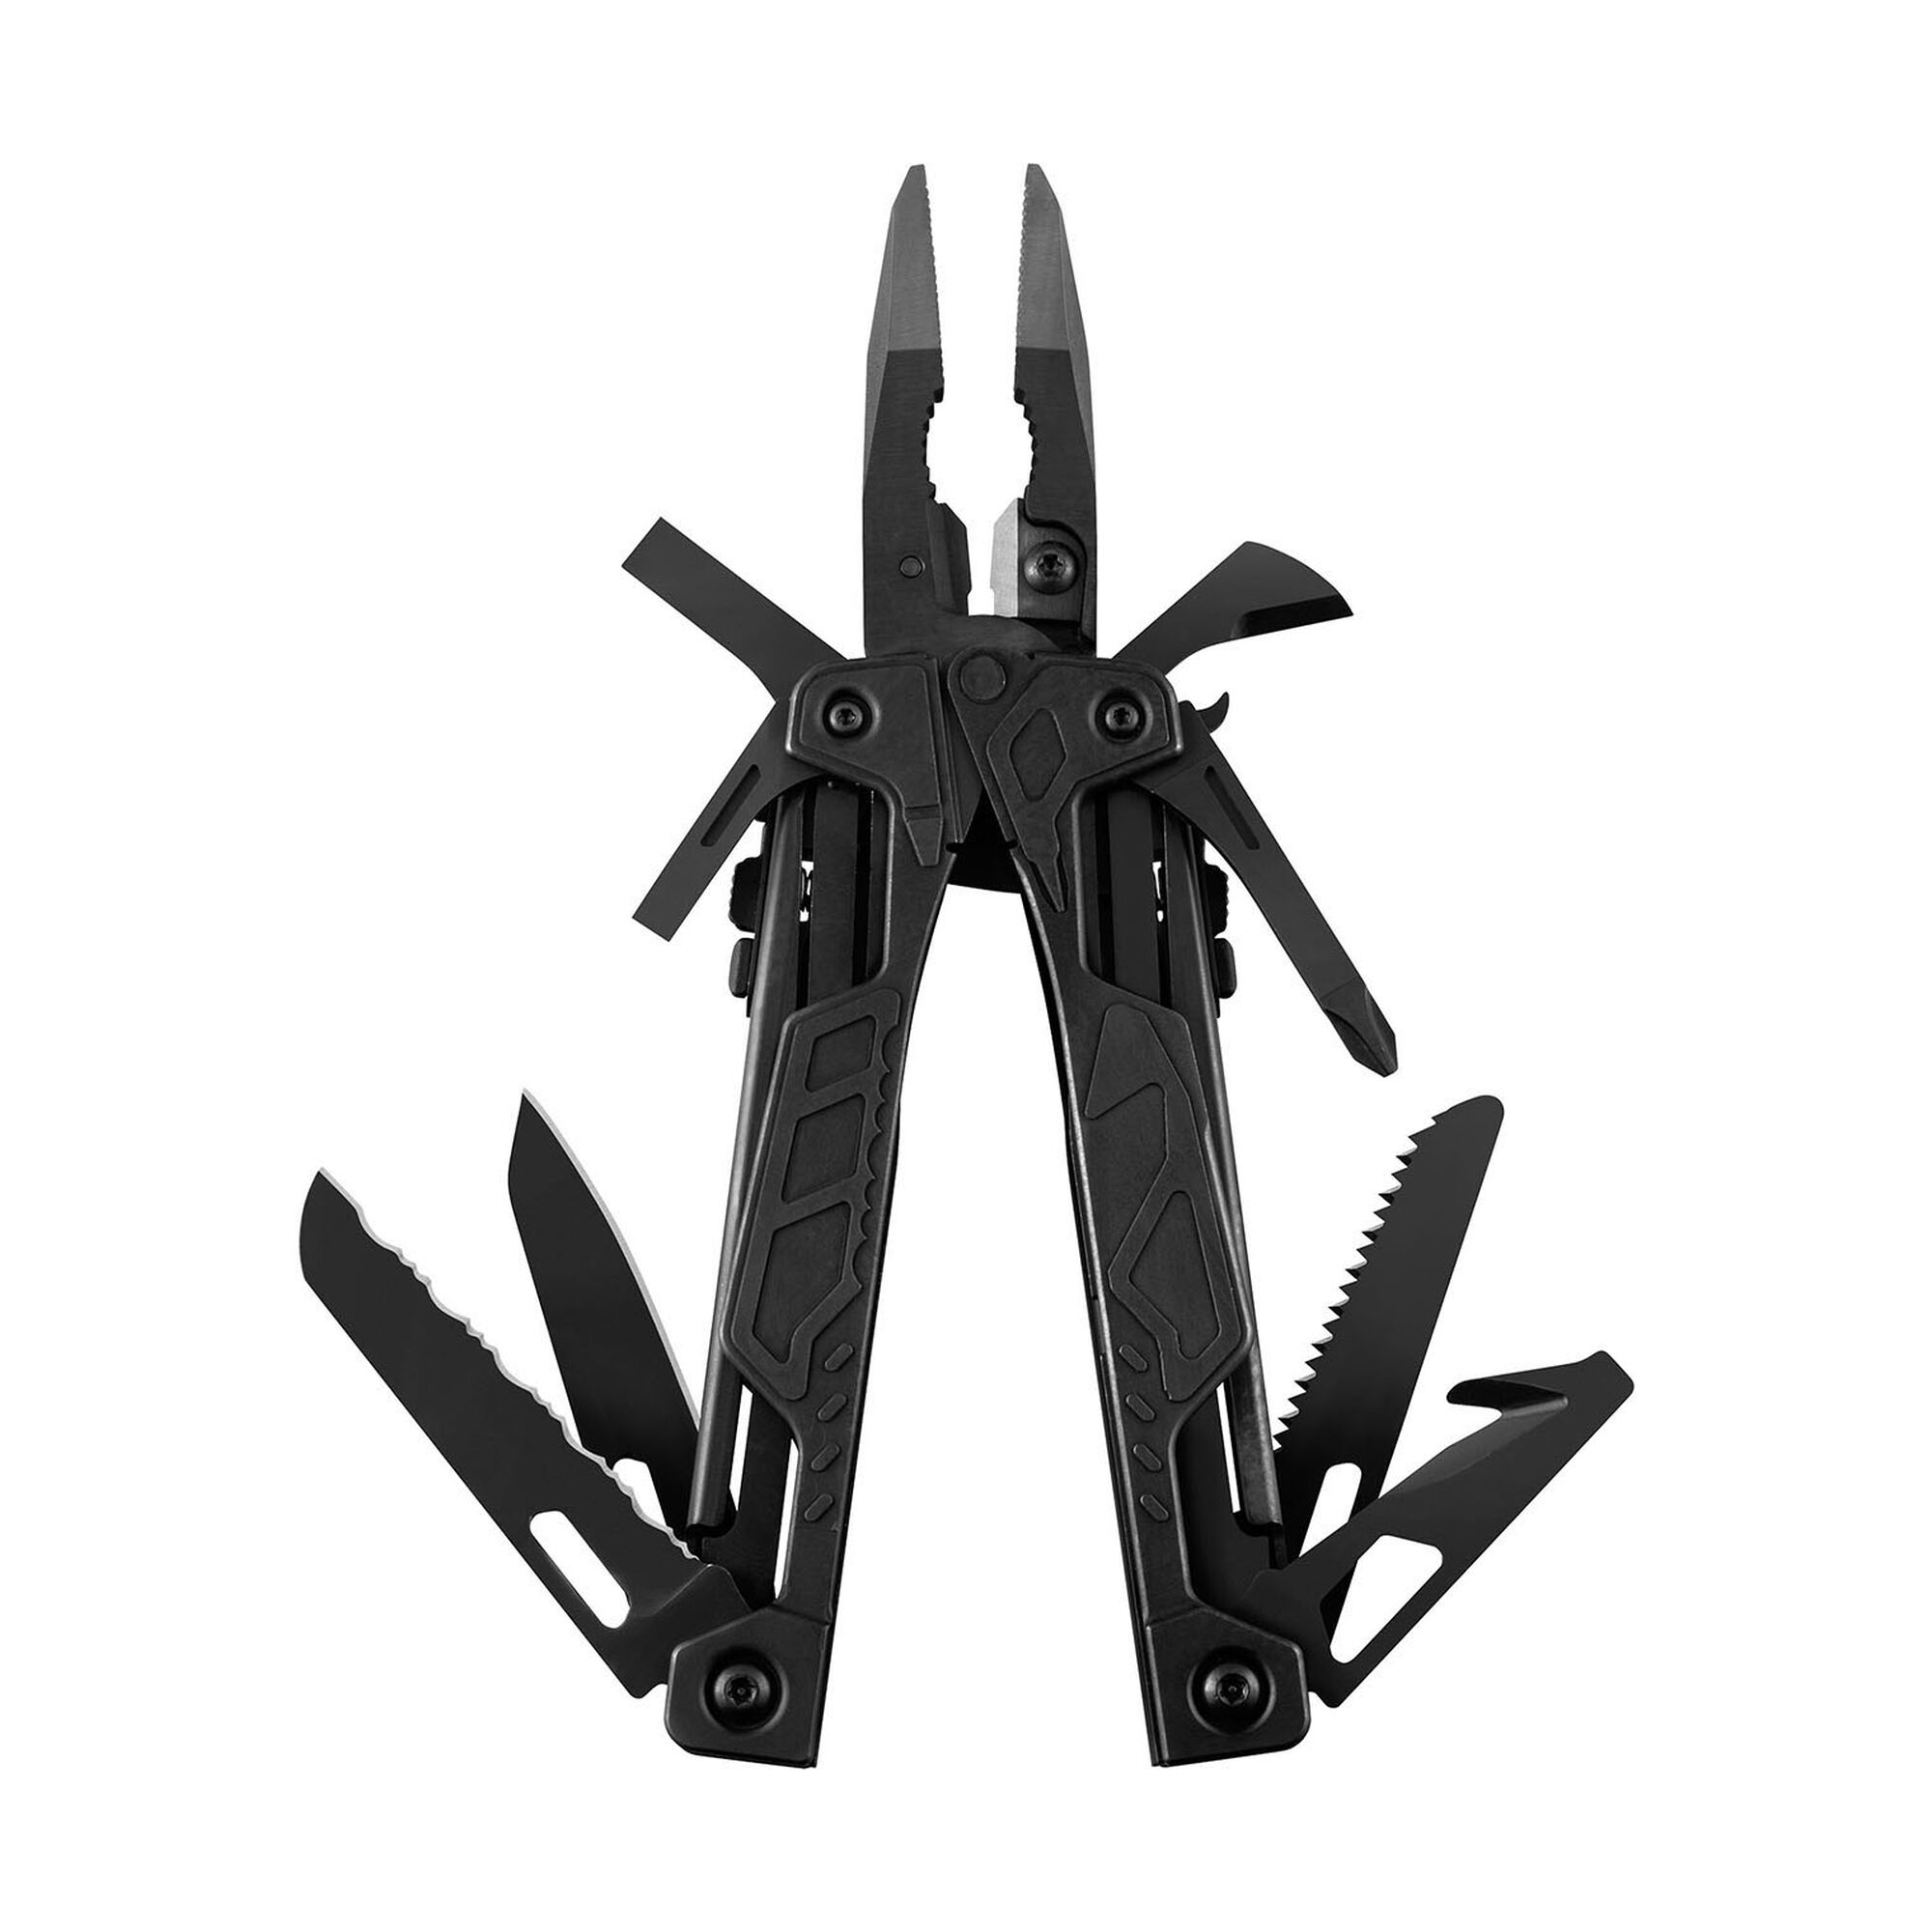 16 in 1 Multitool Pocket Knife Multipurpose Pliers with Phone Holder Stand  - Hunting, Camping, Fishing and Hiking 